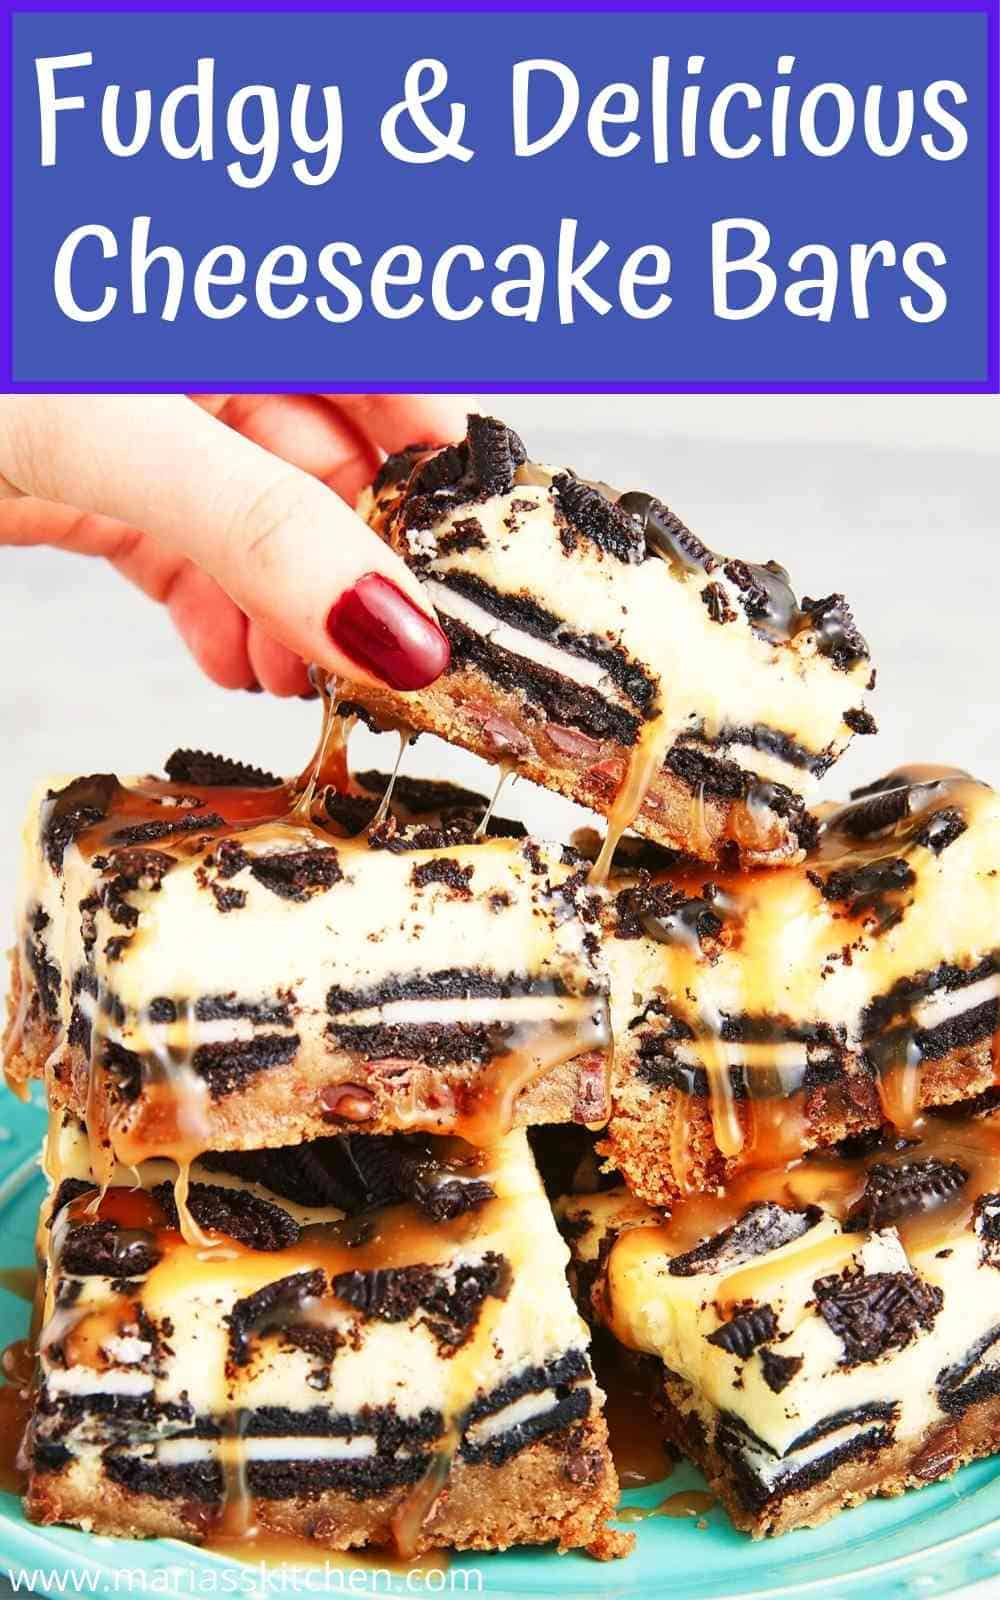 Fudgy and Delicious Cheesecake Bars - Maria's Kitchen